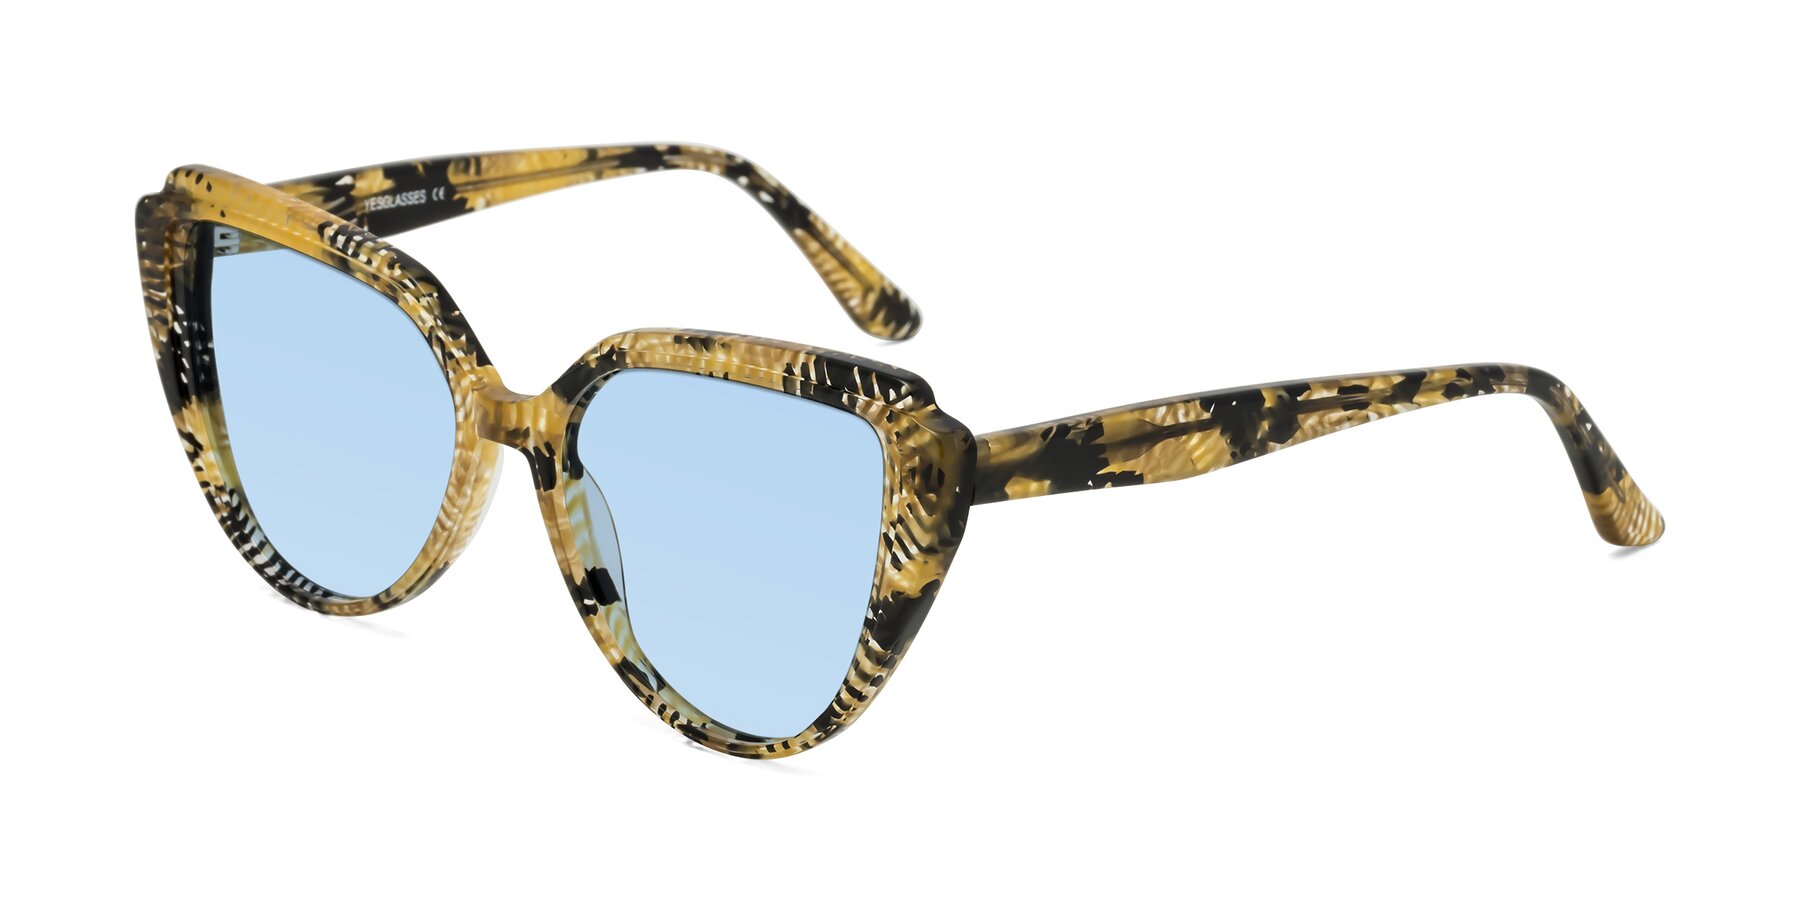 Angle of Zubar in Yellow Snake Print with Light Blue Tinted Lenses